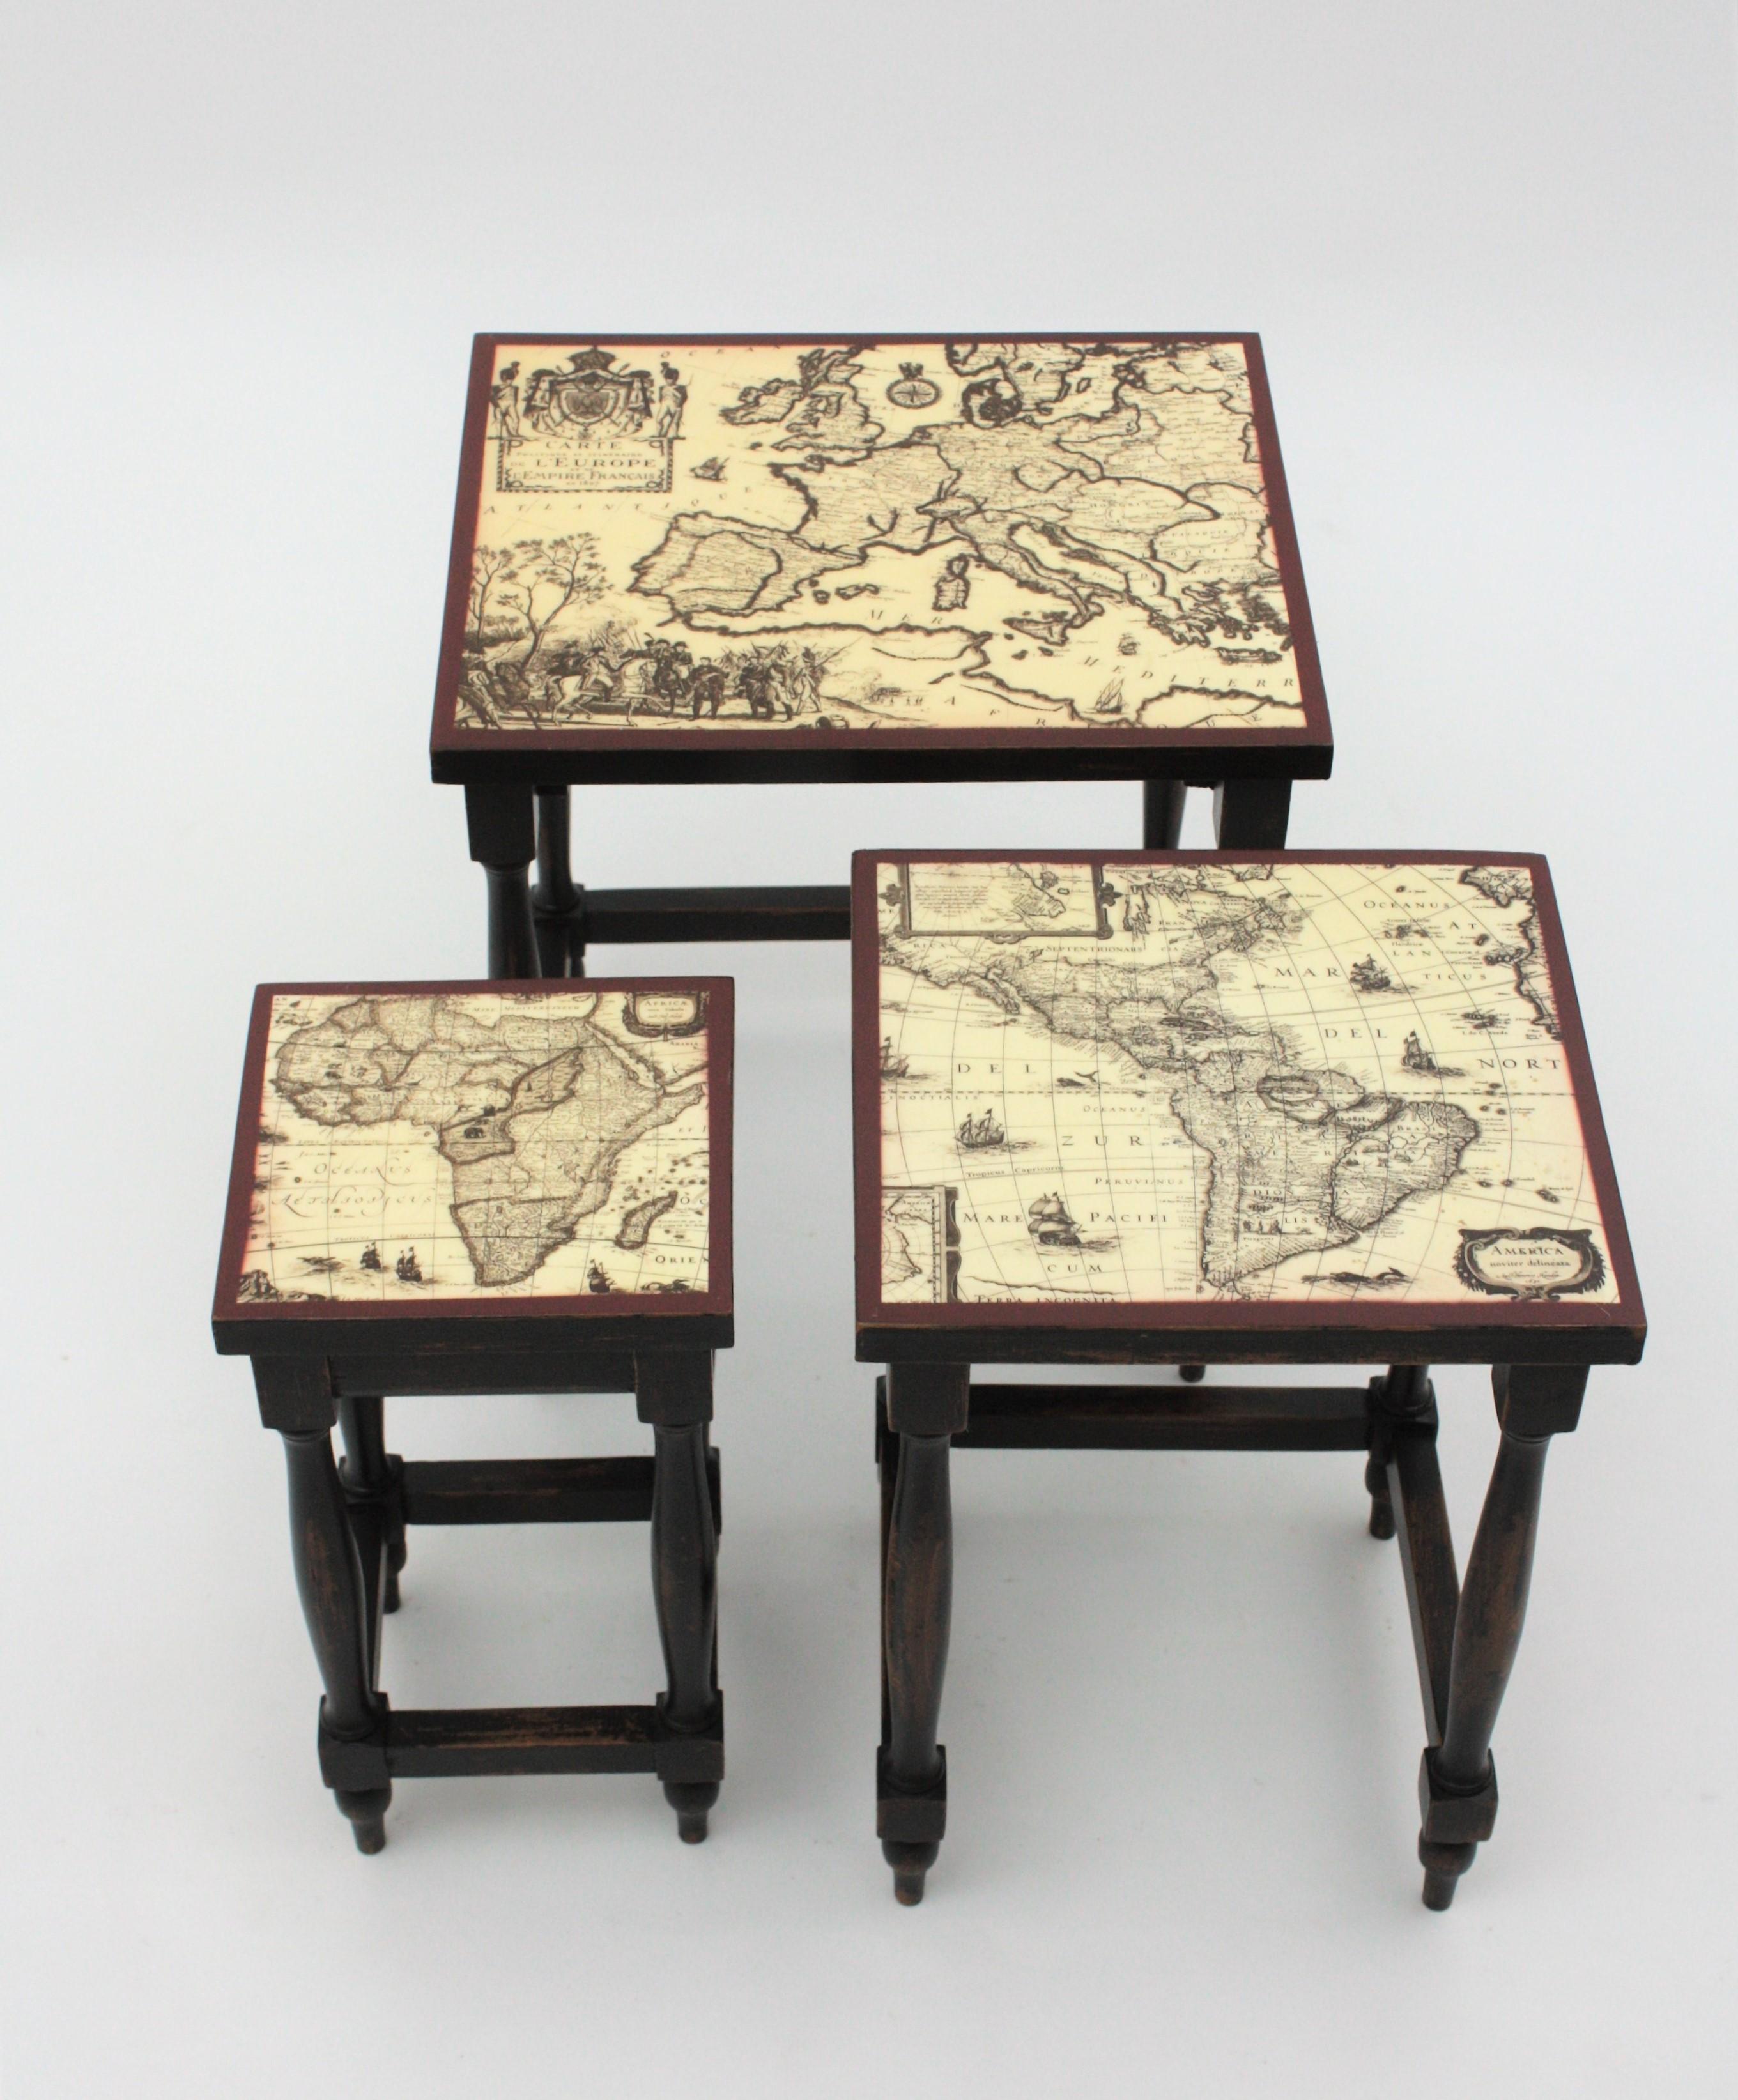 20th Century French Nesting Tables in Wood with Maps Tops, 1940s For Sale